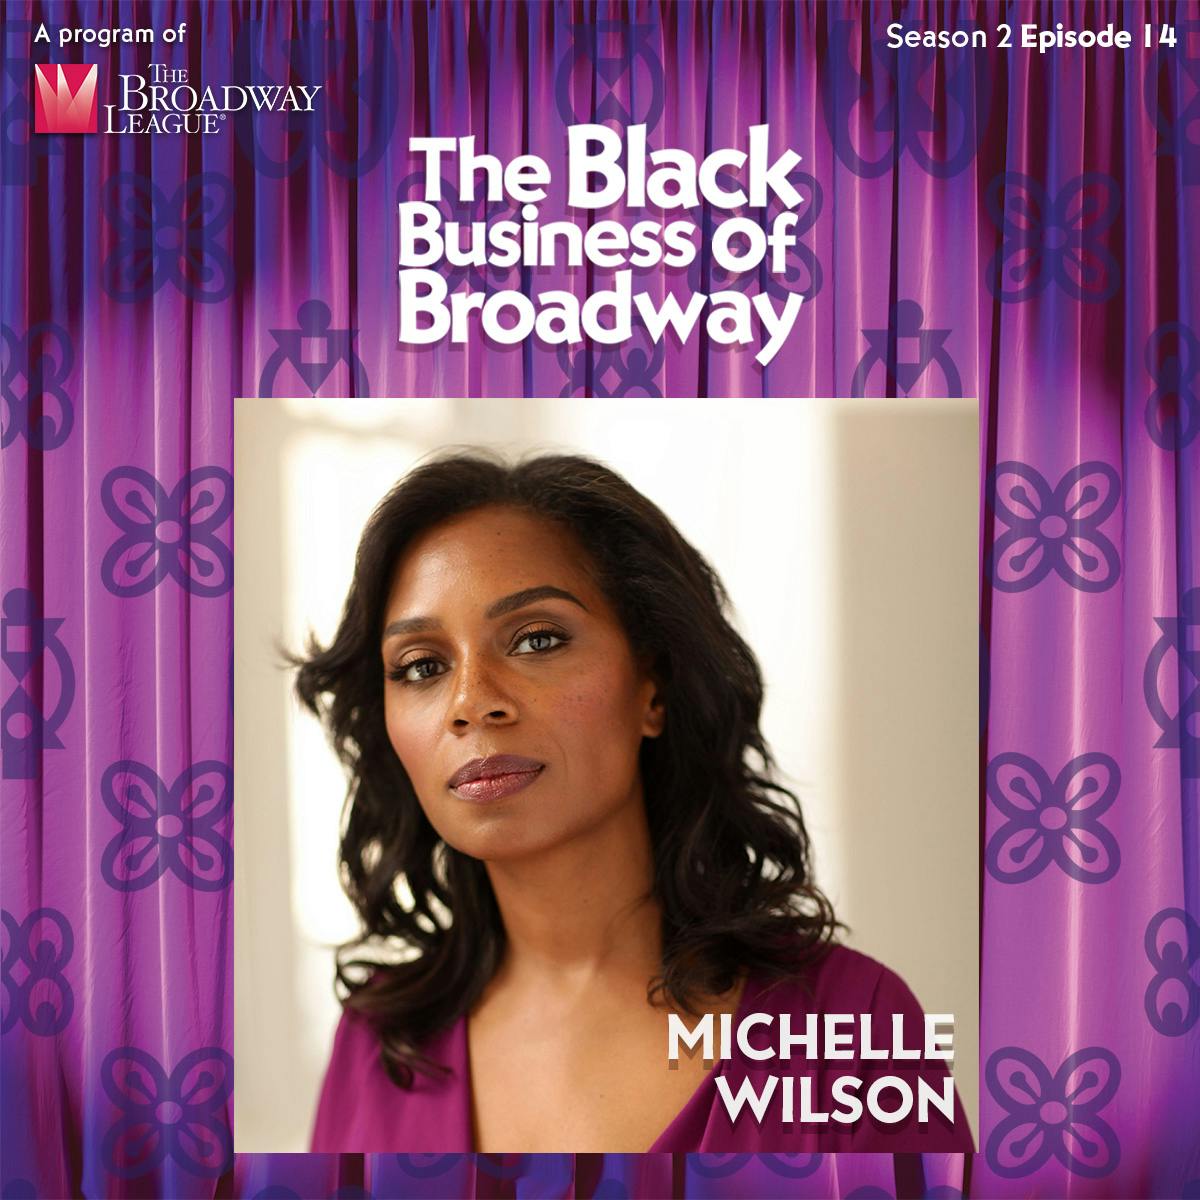 #26 Leading with Grace and Compassion: Michelle Wilson